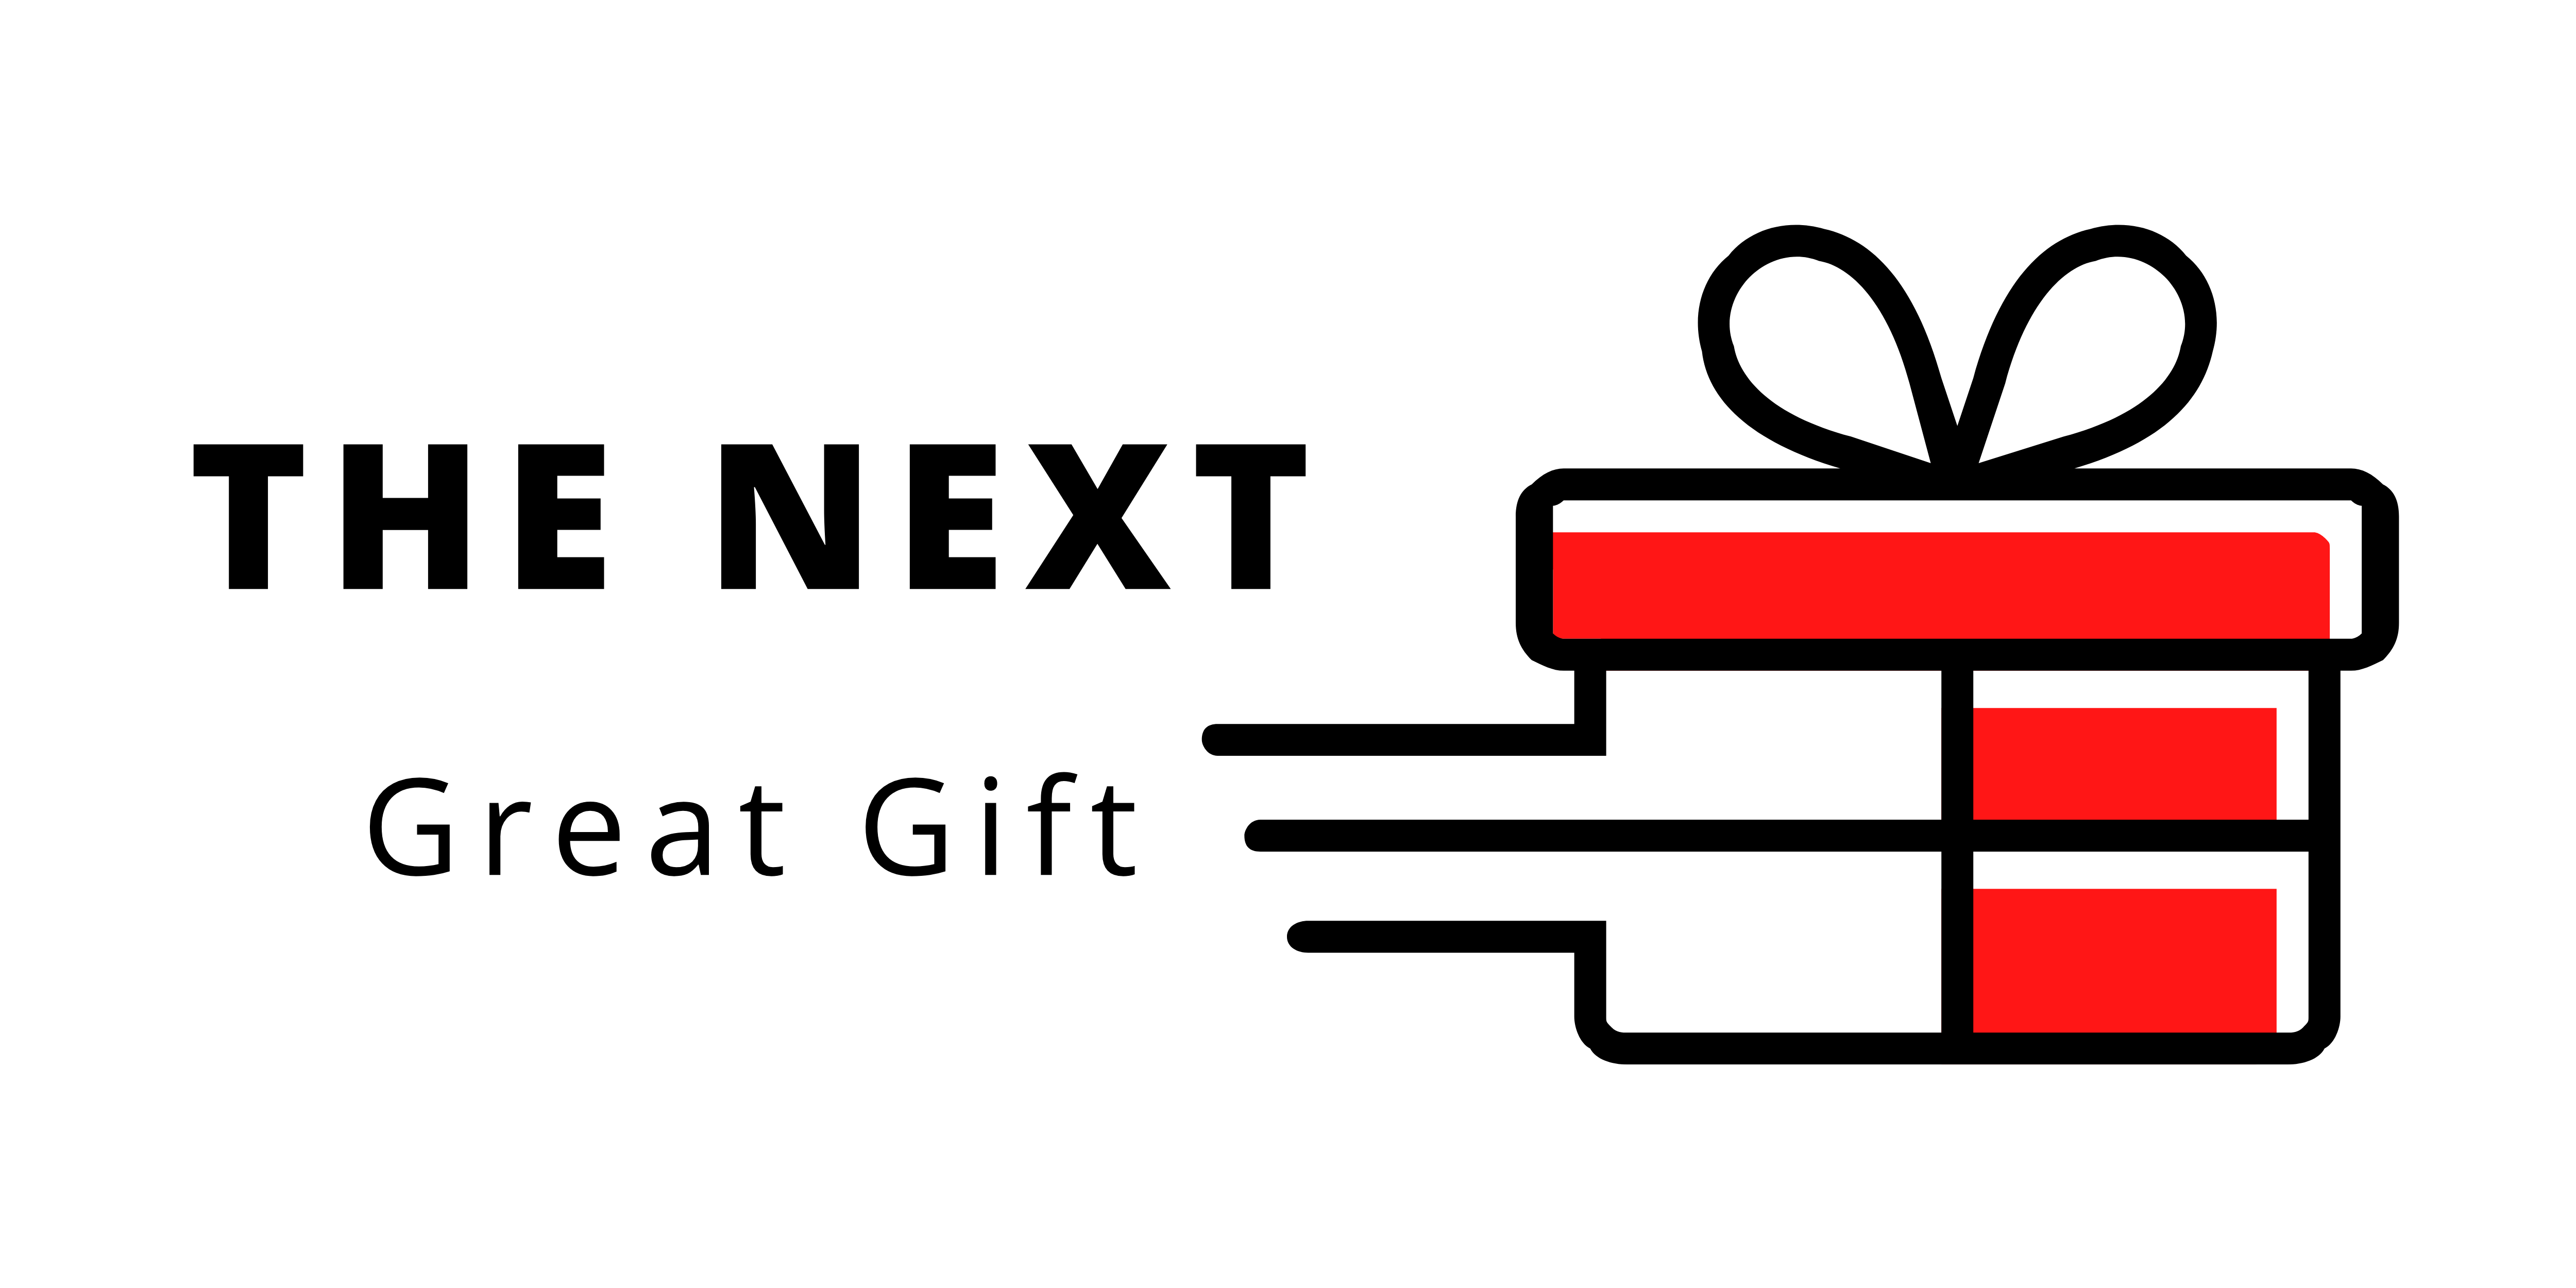 The Next Great Gift